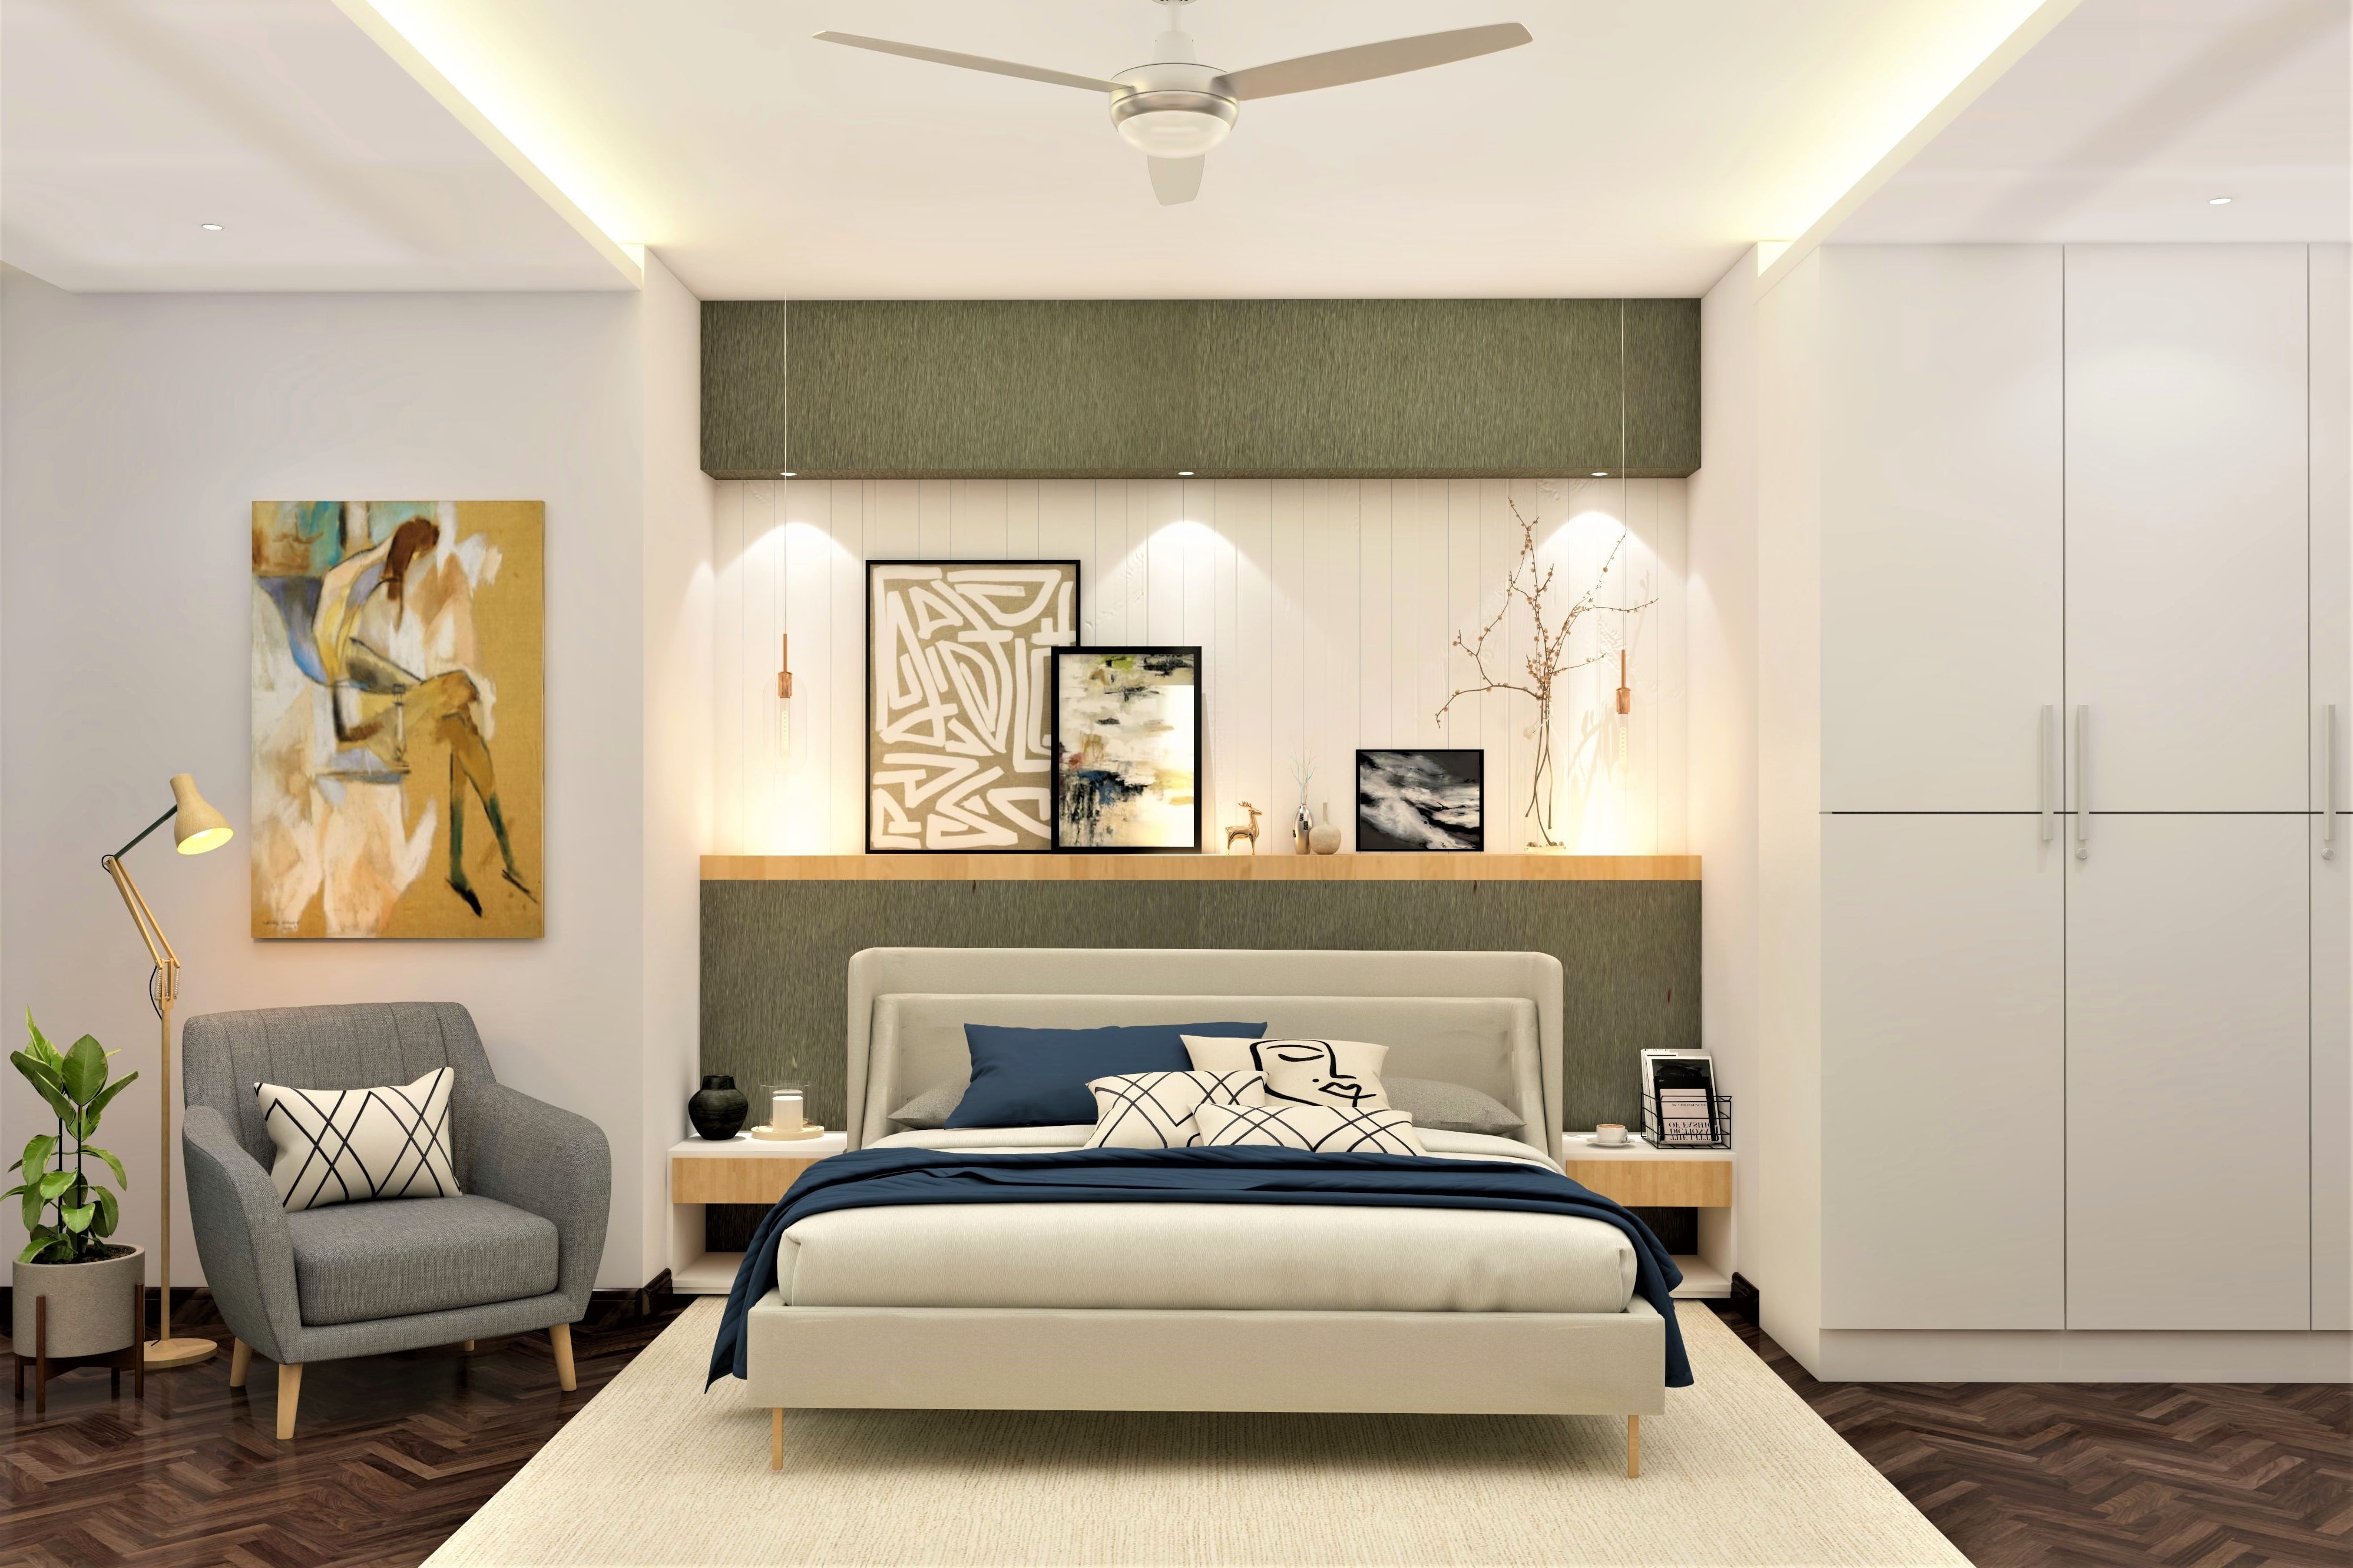 Contemporary bedroom design with a feature wall - Beautiful Homes